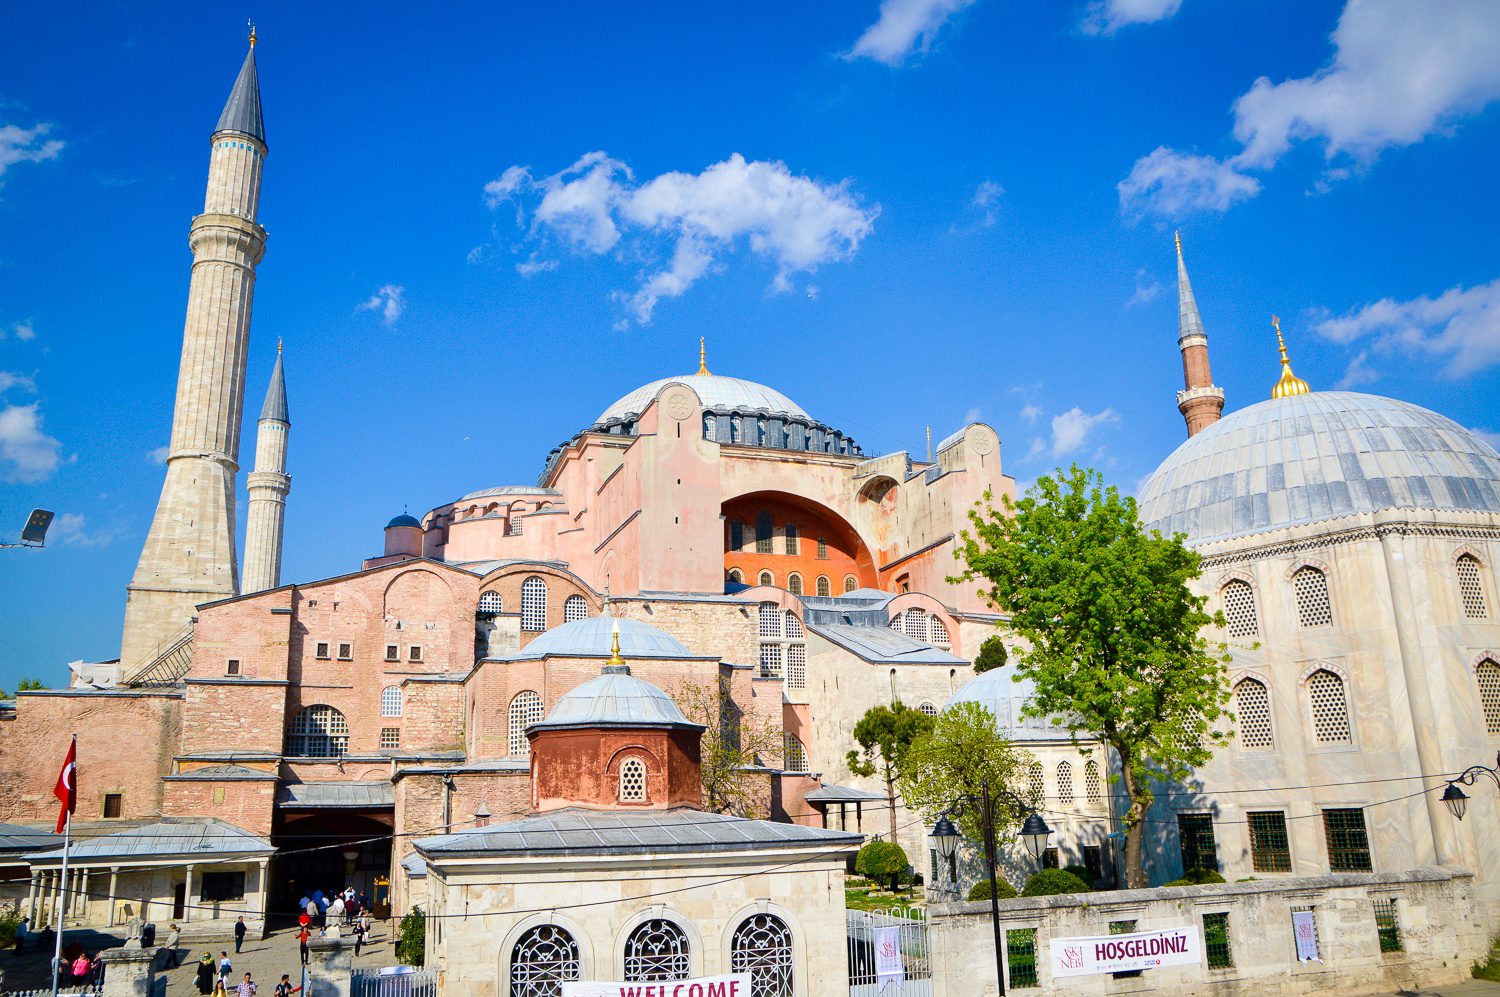 The famous Hagia Sophia in Istanubl.